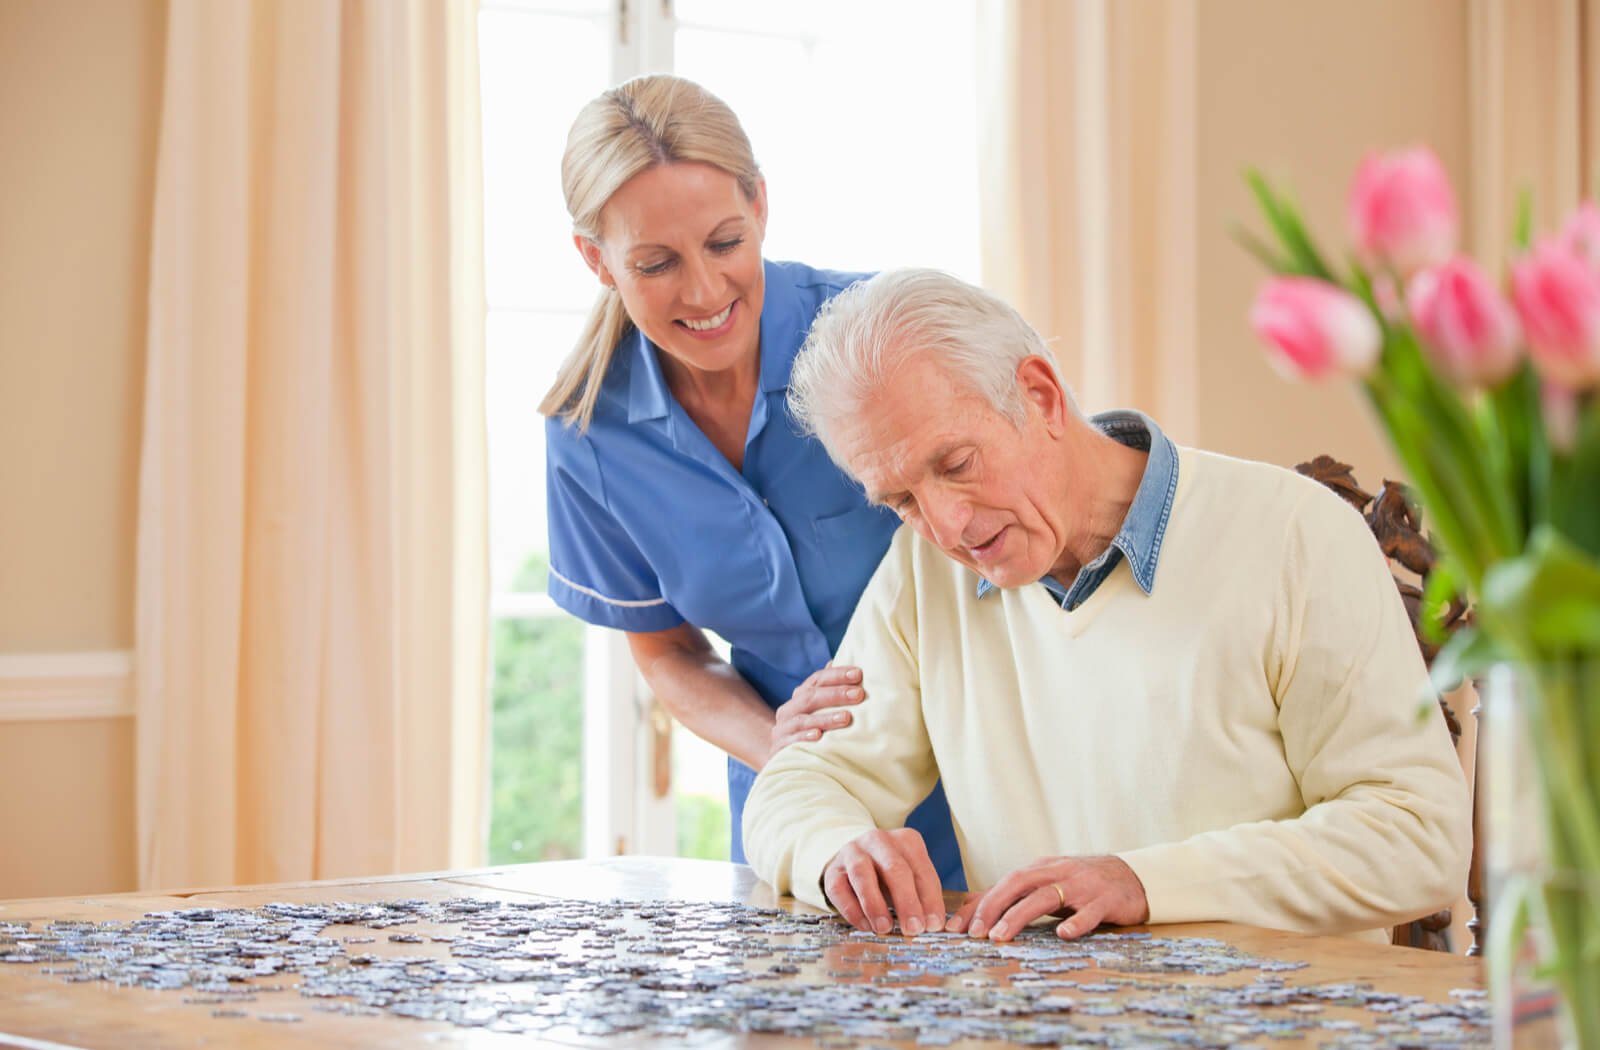 a nurse and a senior man are in a respite home, working on a puzzle together